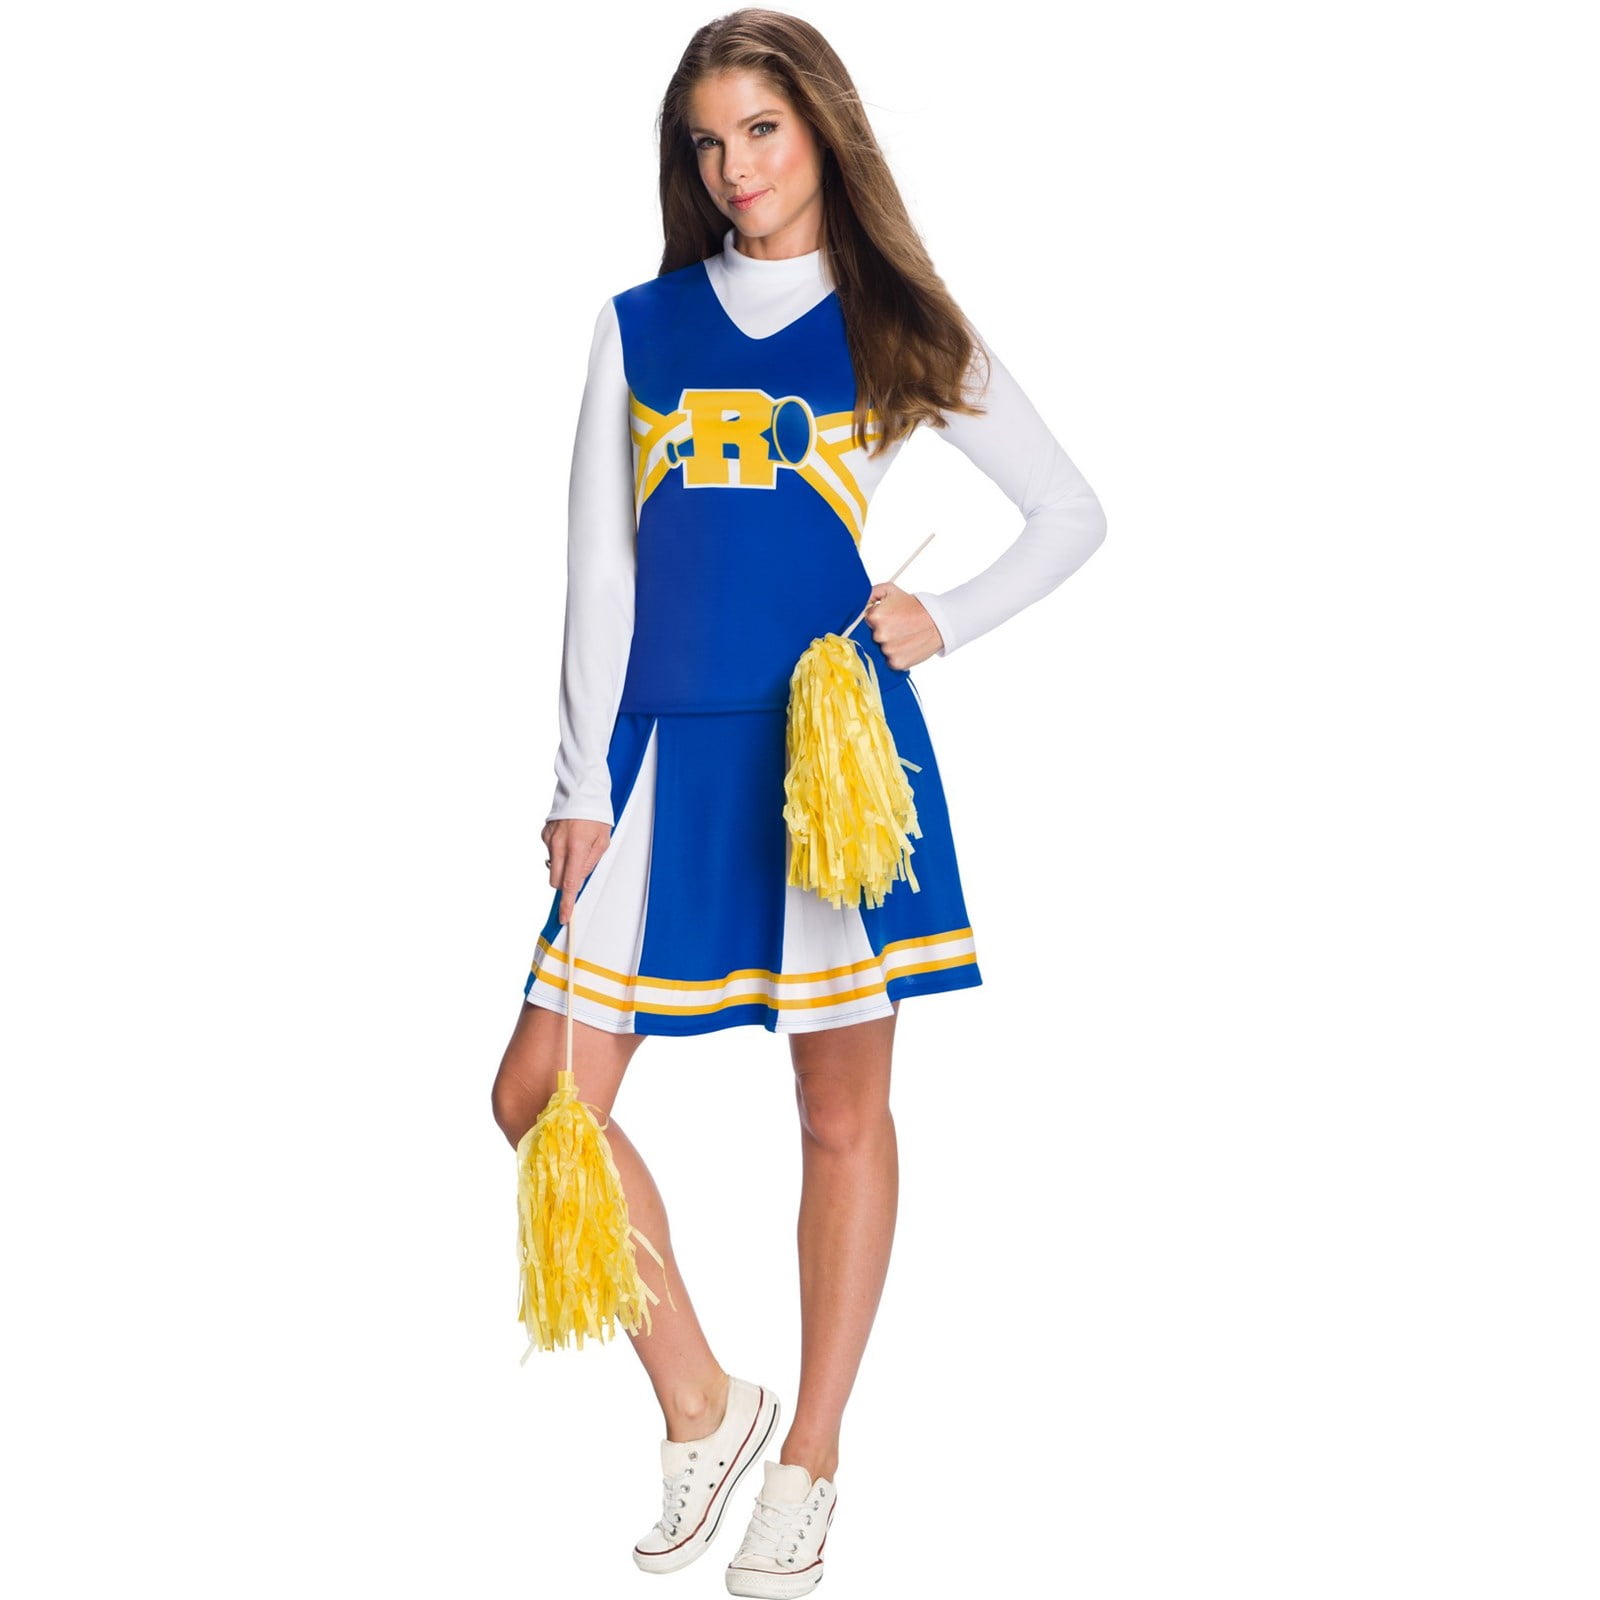 Cheerleader Challenge Electronic Practice Mat With Costume Ages 5 